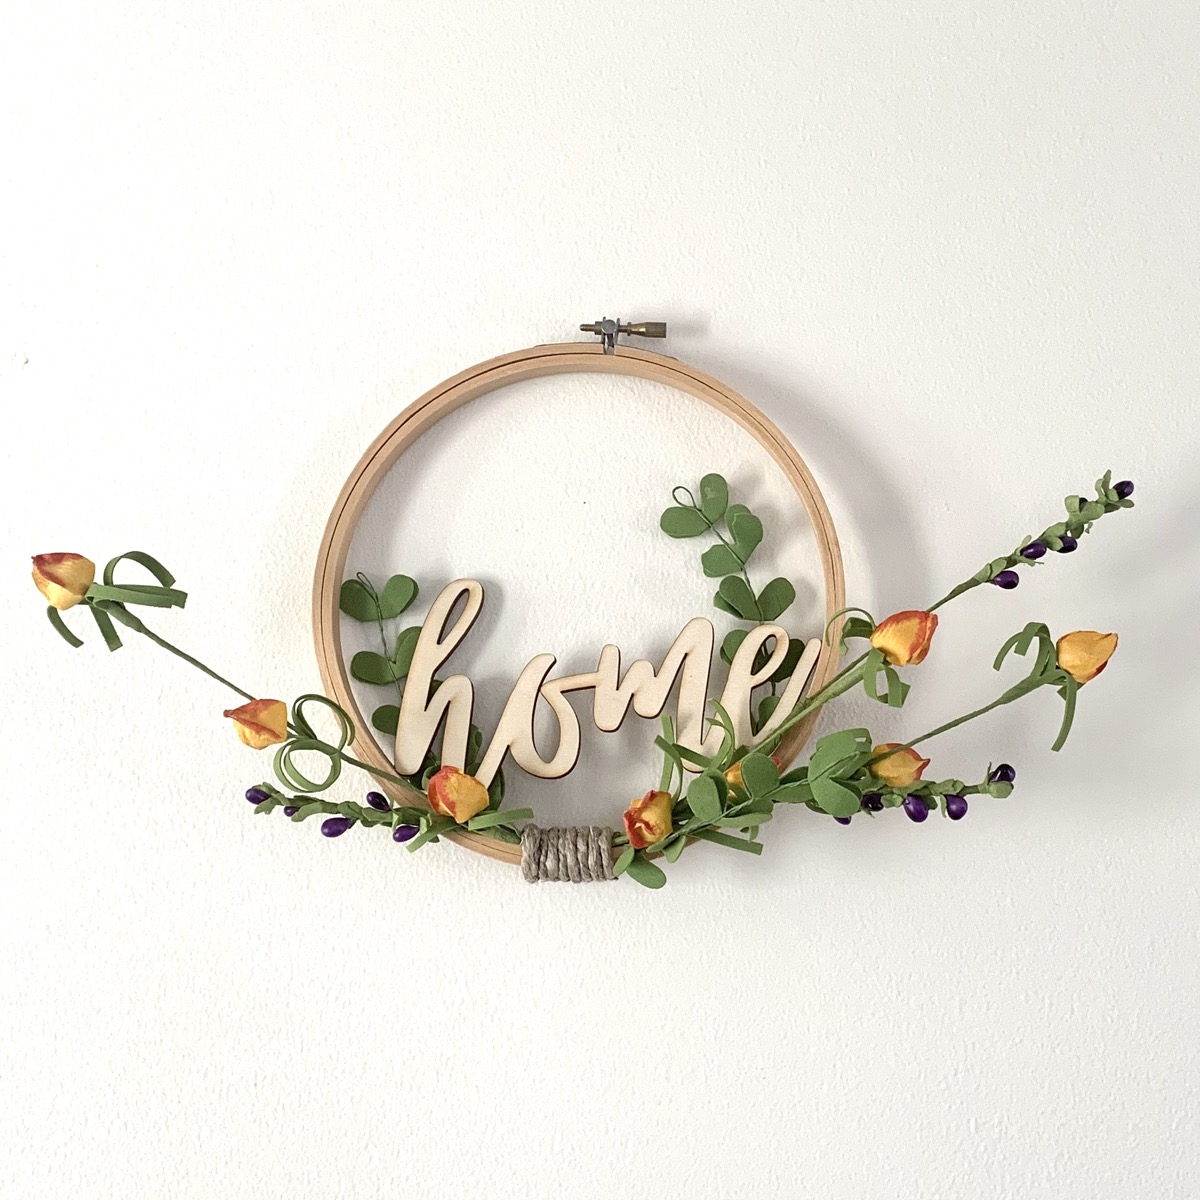 Faux Wood Embroidery Hoops